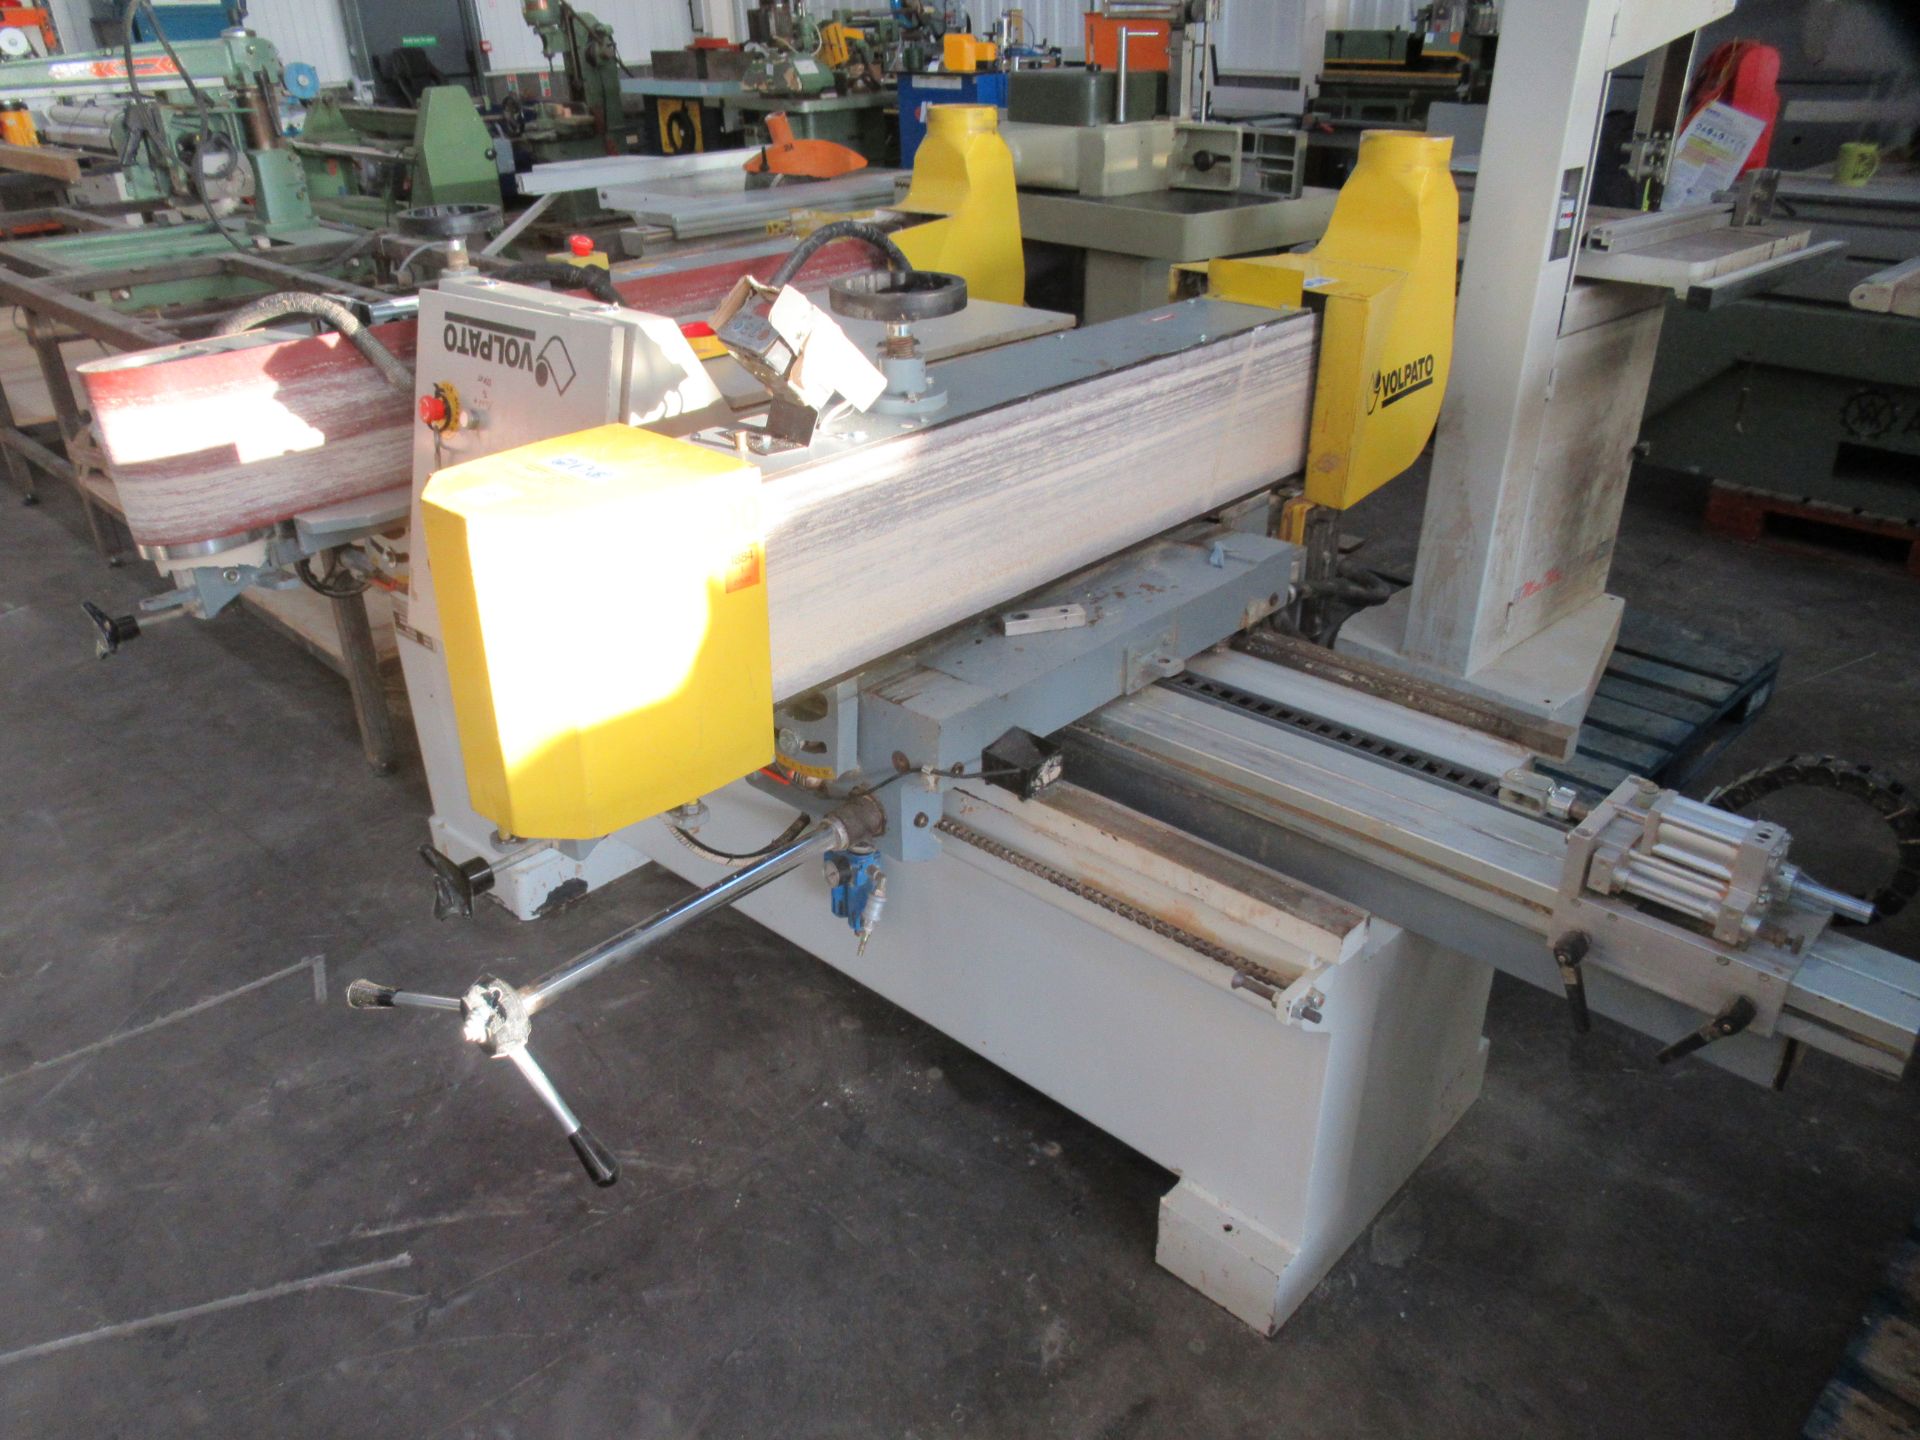 Volpato RCG 1200 Double Sided Sander - 400V; 15.8kW - Image 6 of 9